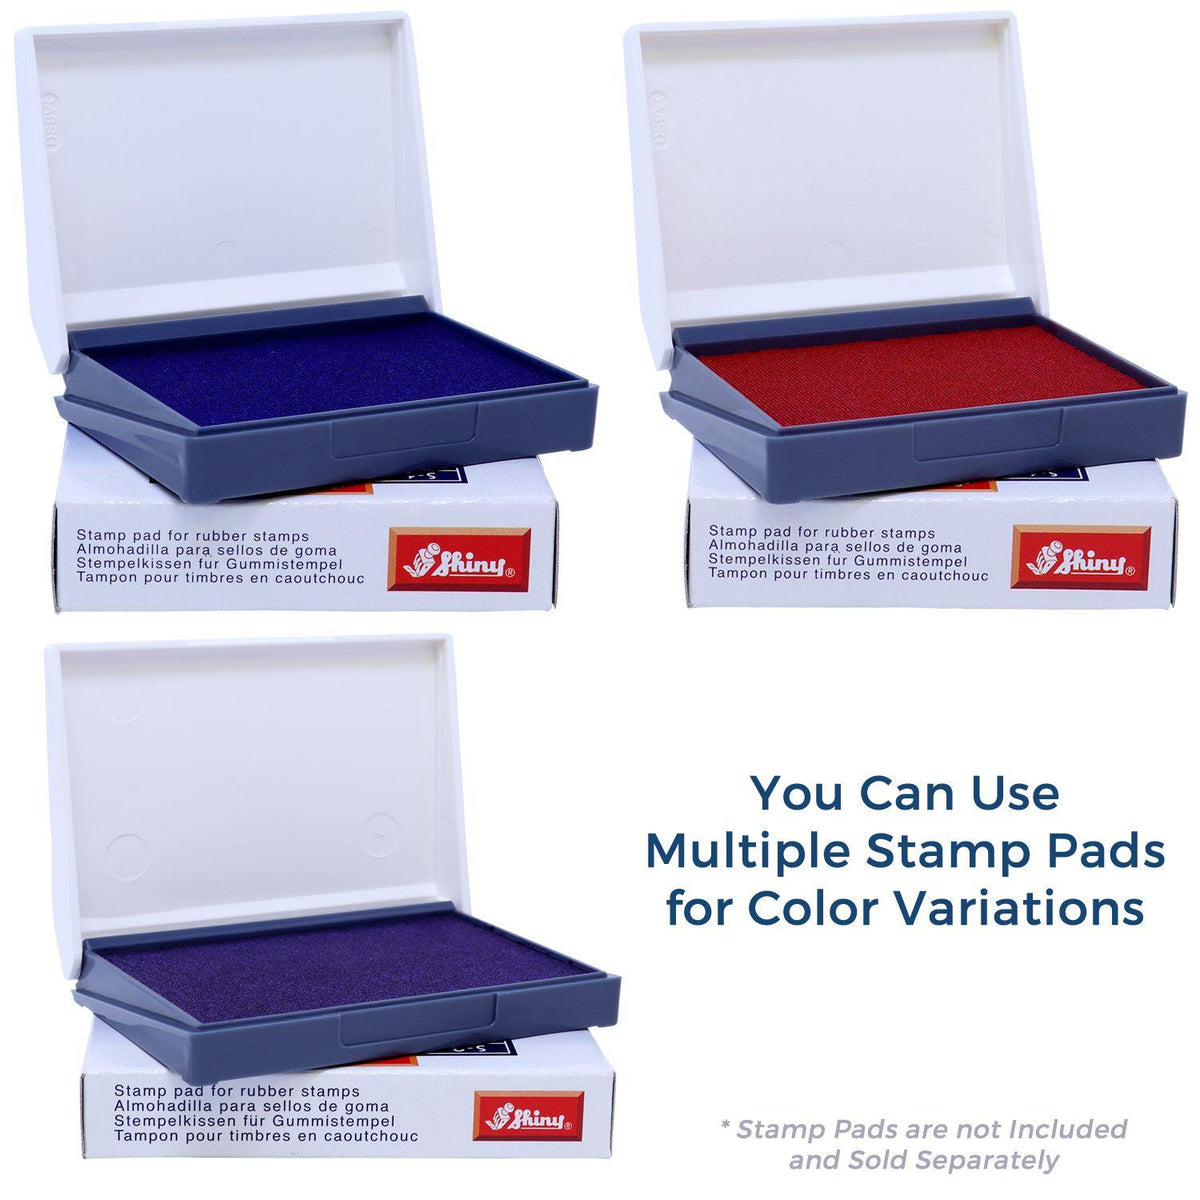 Stamp Pads for Via Aerea Rubber Stamp Available